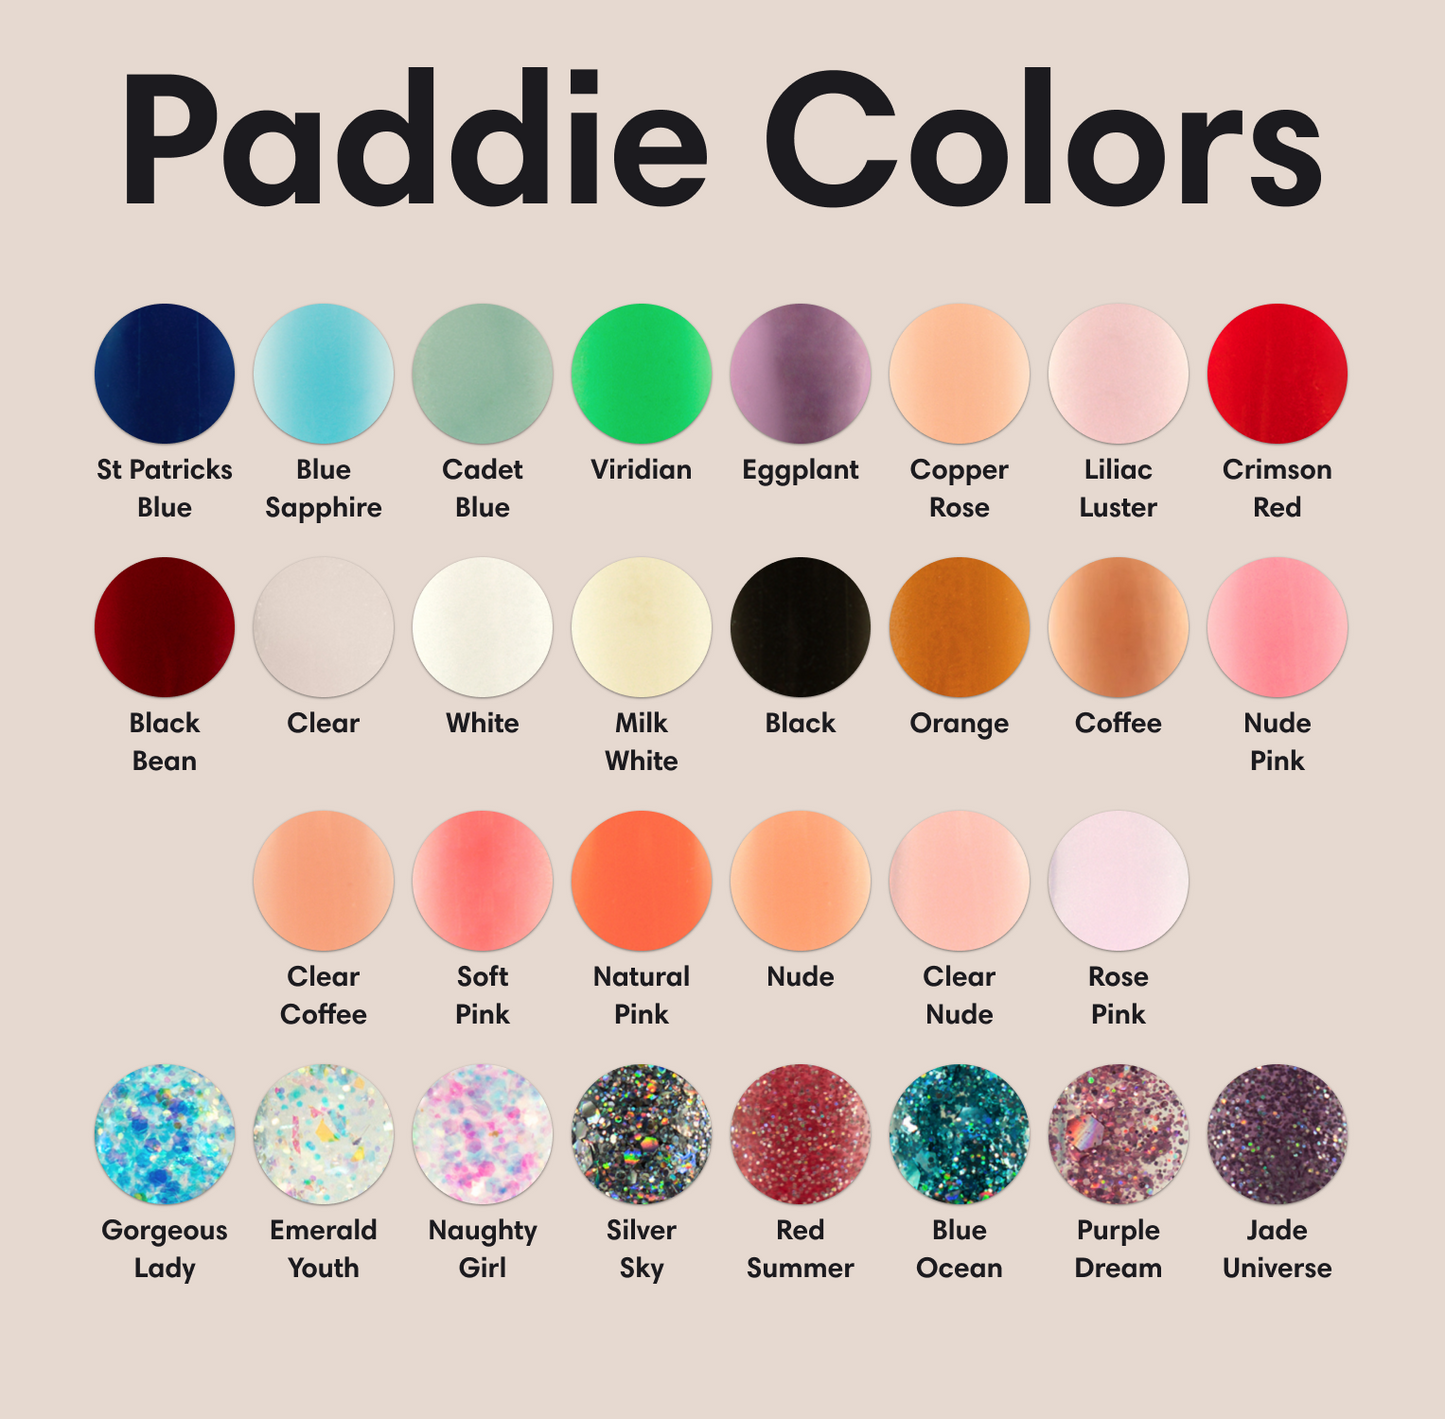 Nail Polygel color options include - St Patricks Blue, Blue Sapphire, Clear, Cadet Blue, Viridian, Soft Pink, Clear Coffee, Emerald Youth, Naughty Girl, White, Silver Sky, Natural Pink, Nude, Eggplant, Milk White, Red Summer, Black, Blue Ocean, Copper Rose, Liliac Luster, Orange, Clear Nude, Rose k, Gorgeous Lady, Crimson Red, Black Bean, Coffee, Purple Dream, Jade Universe, Nude pink.